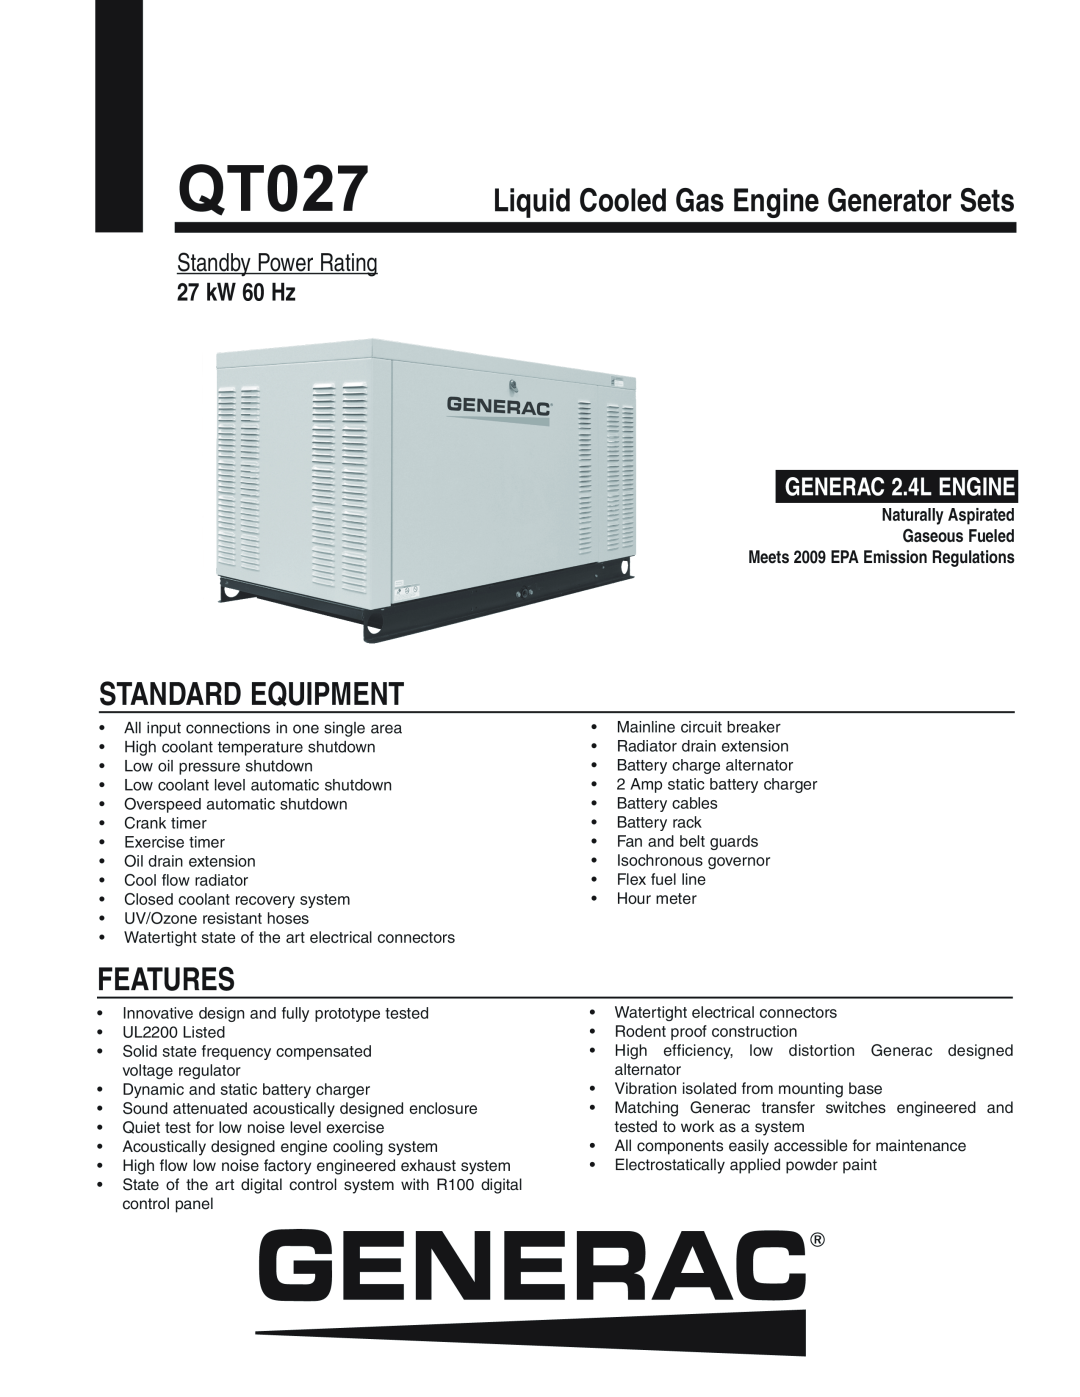 Generac Power Systems QT027 manual Standard Equipment, Features, Naturally Aspirated Gaseous Fueled, Standby Power Rating 